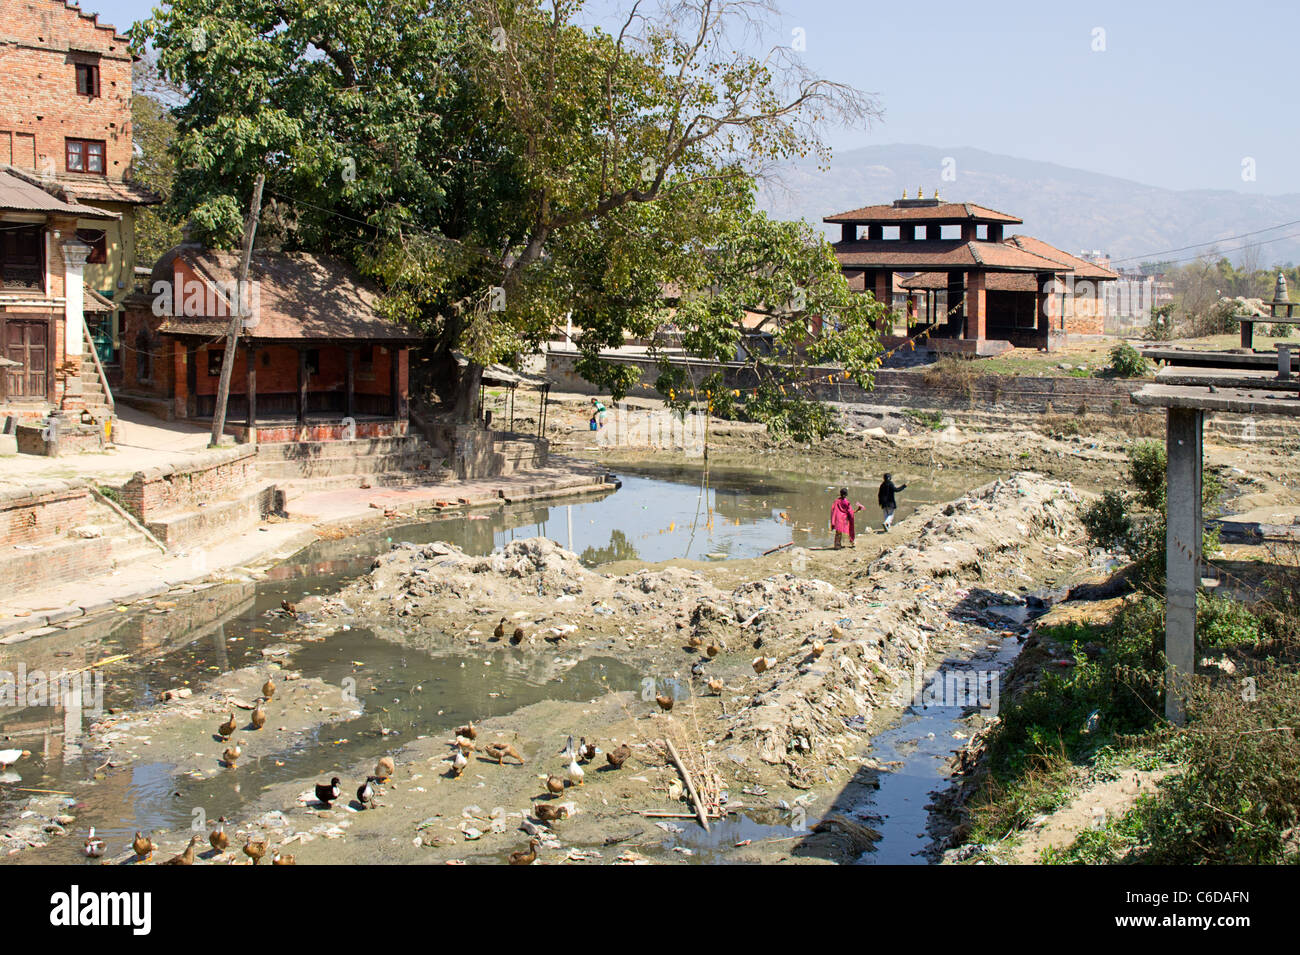 Heavily polluted river with ducks in Kathmandu, Central Region, Nepal Stock Photo